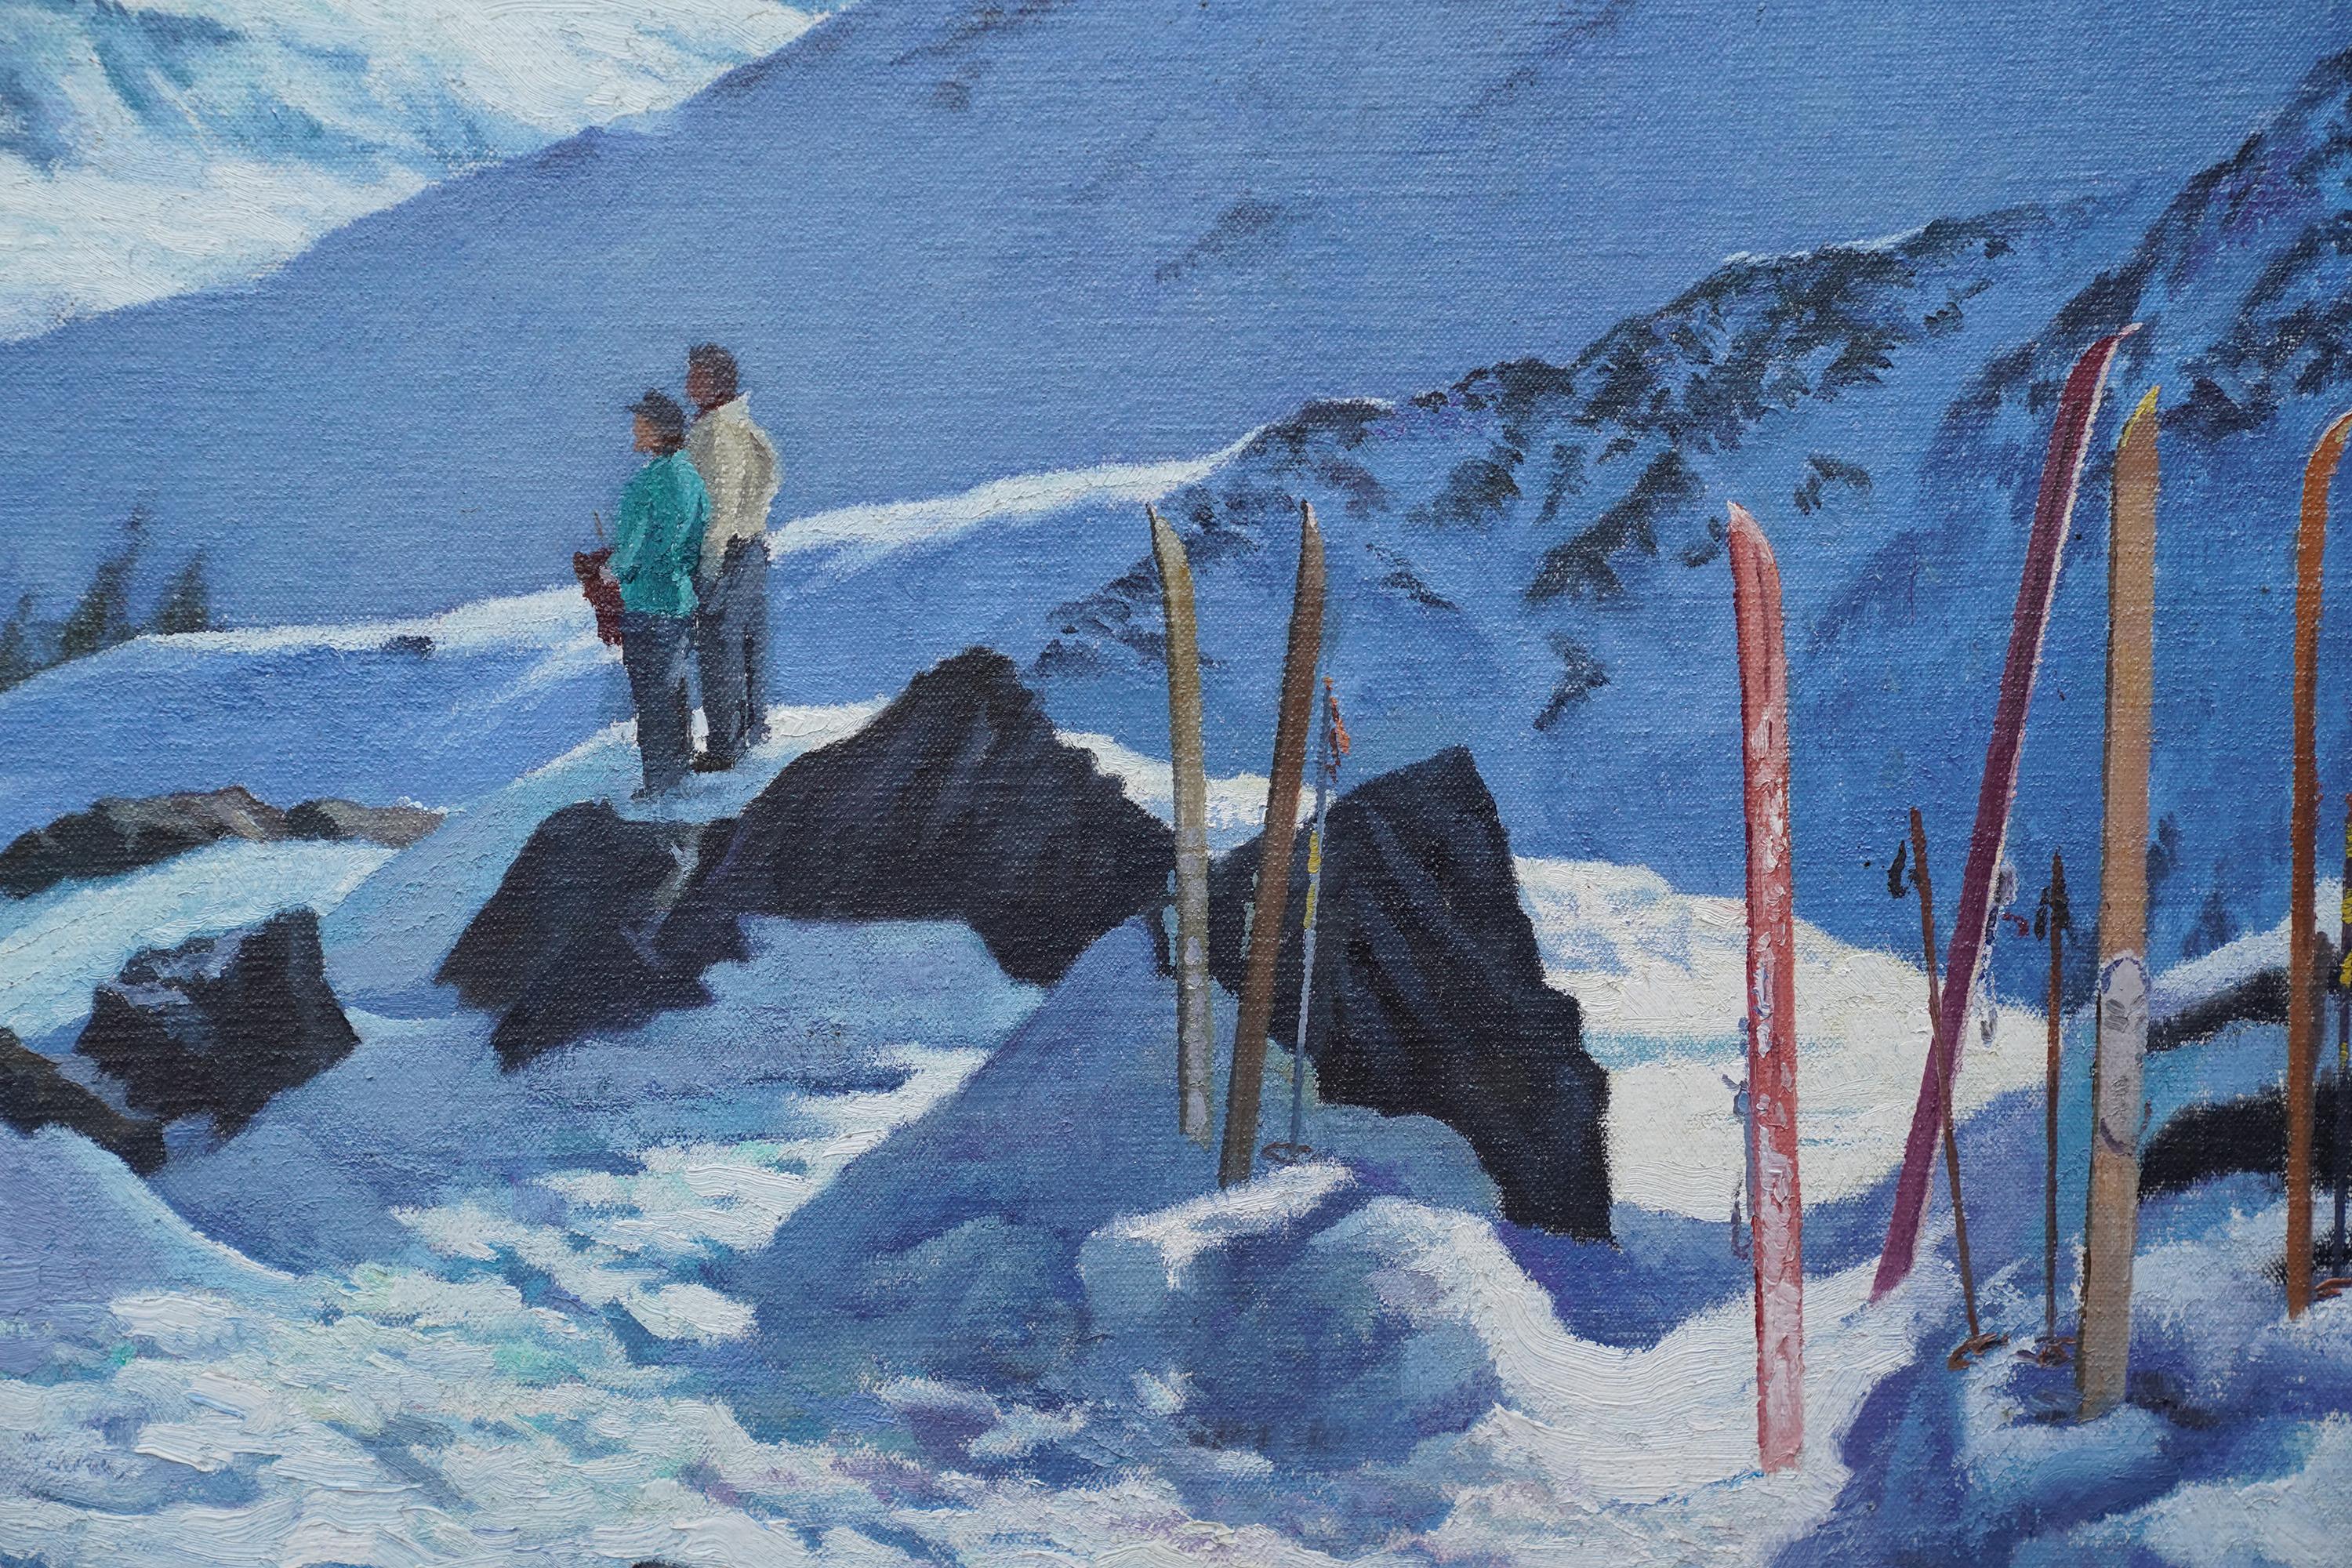 Couple in a Snowy Mountainous Landscape - British 1940's art skiing oil painting For Sale 1